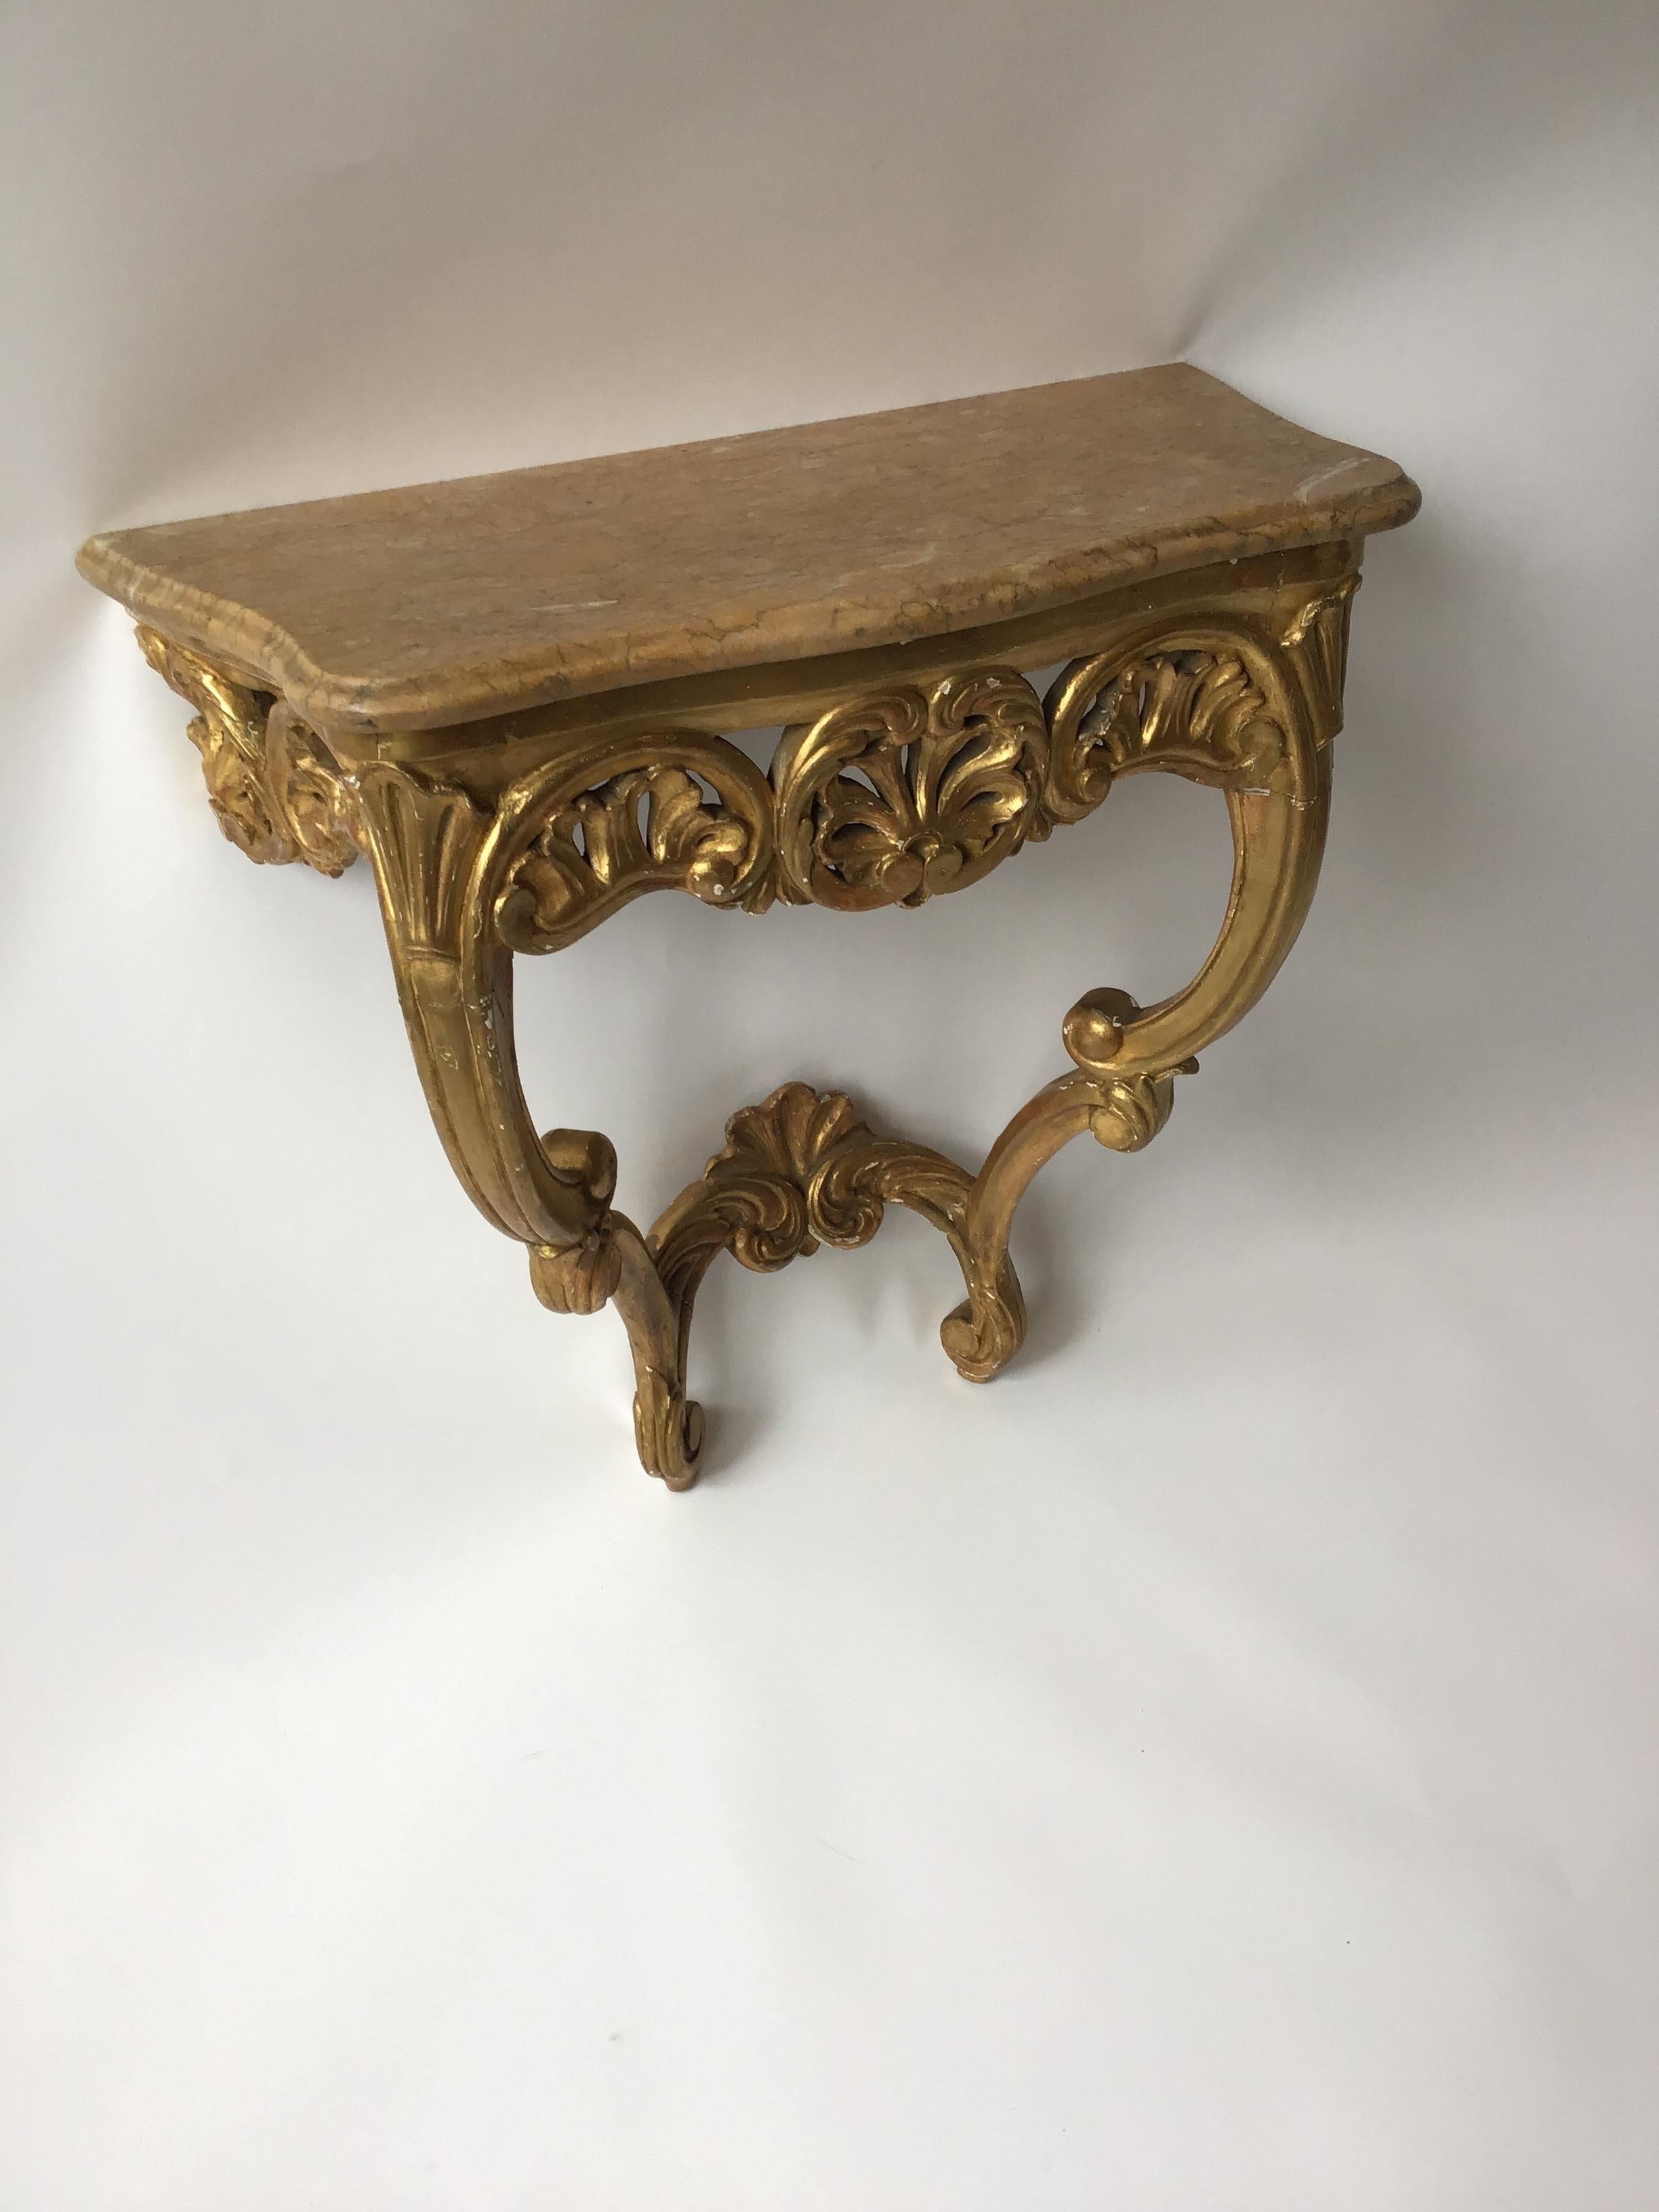 1870s French giltwood wall console with marble top.